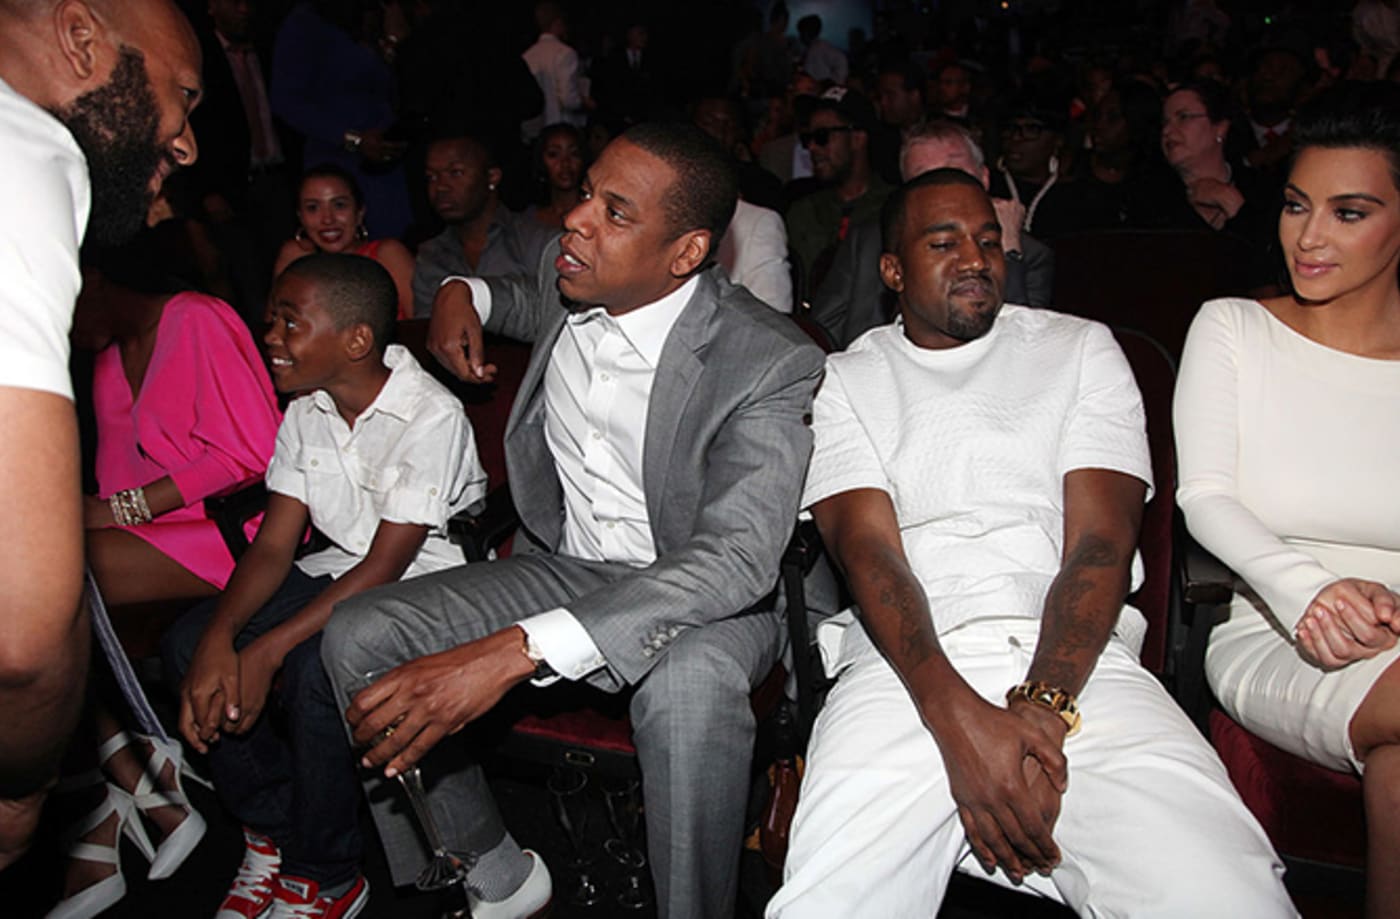 This is a photo of Jay Z and Kanye West.